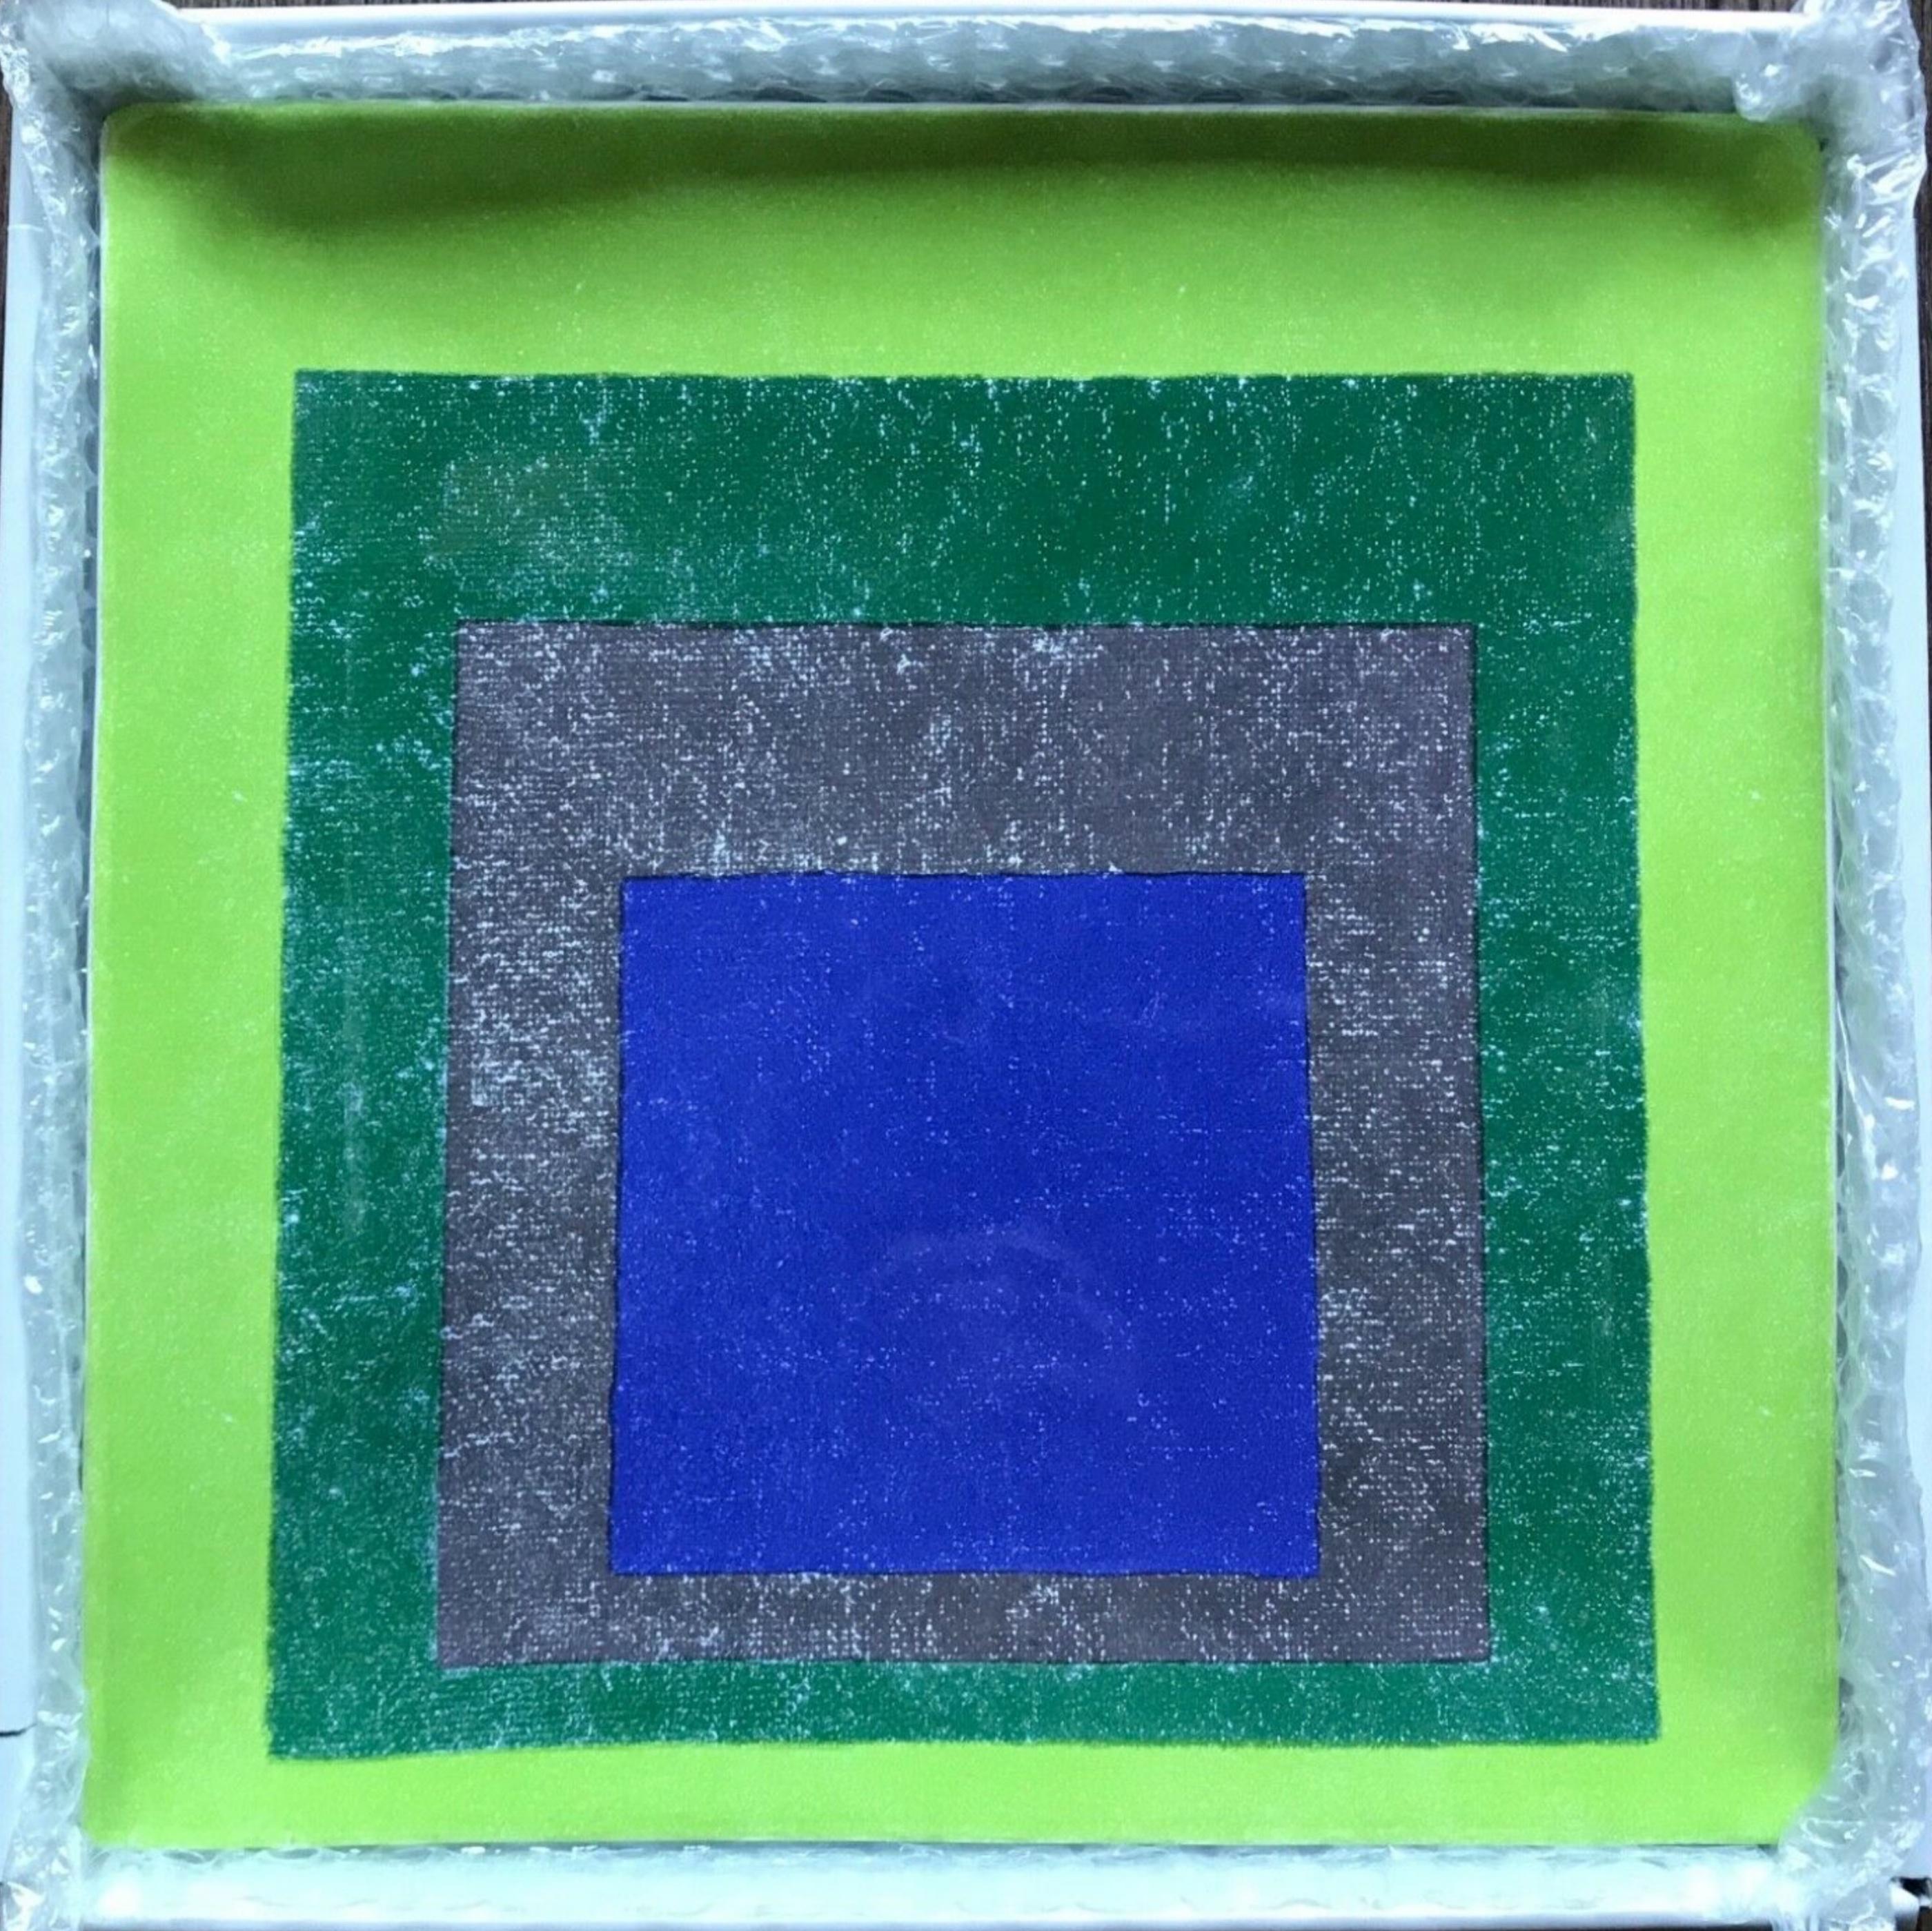 Limited Edition Study for Homage to the Square porcelain plate in box for MOCA - Abstract Geometric Art by Josef Albers